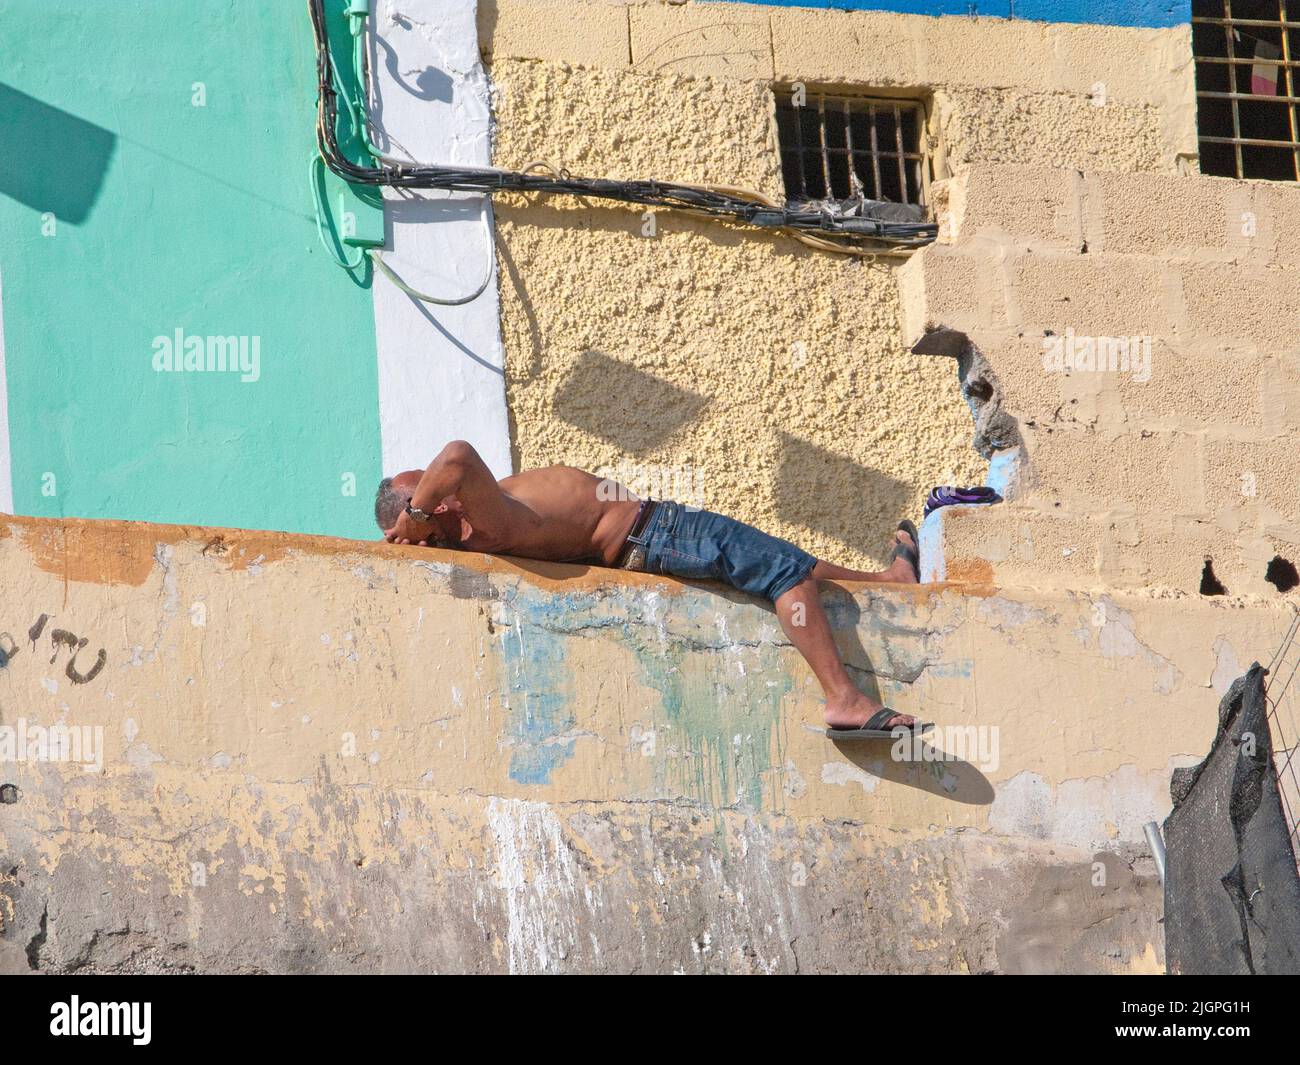 Man sleeping in front of a house, disrict San Nicolas, Las Palmas, Grand Canary, Canary islands, Spain, Europe Stock Photo